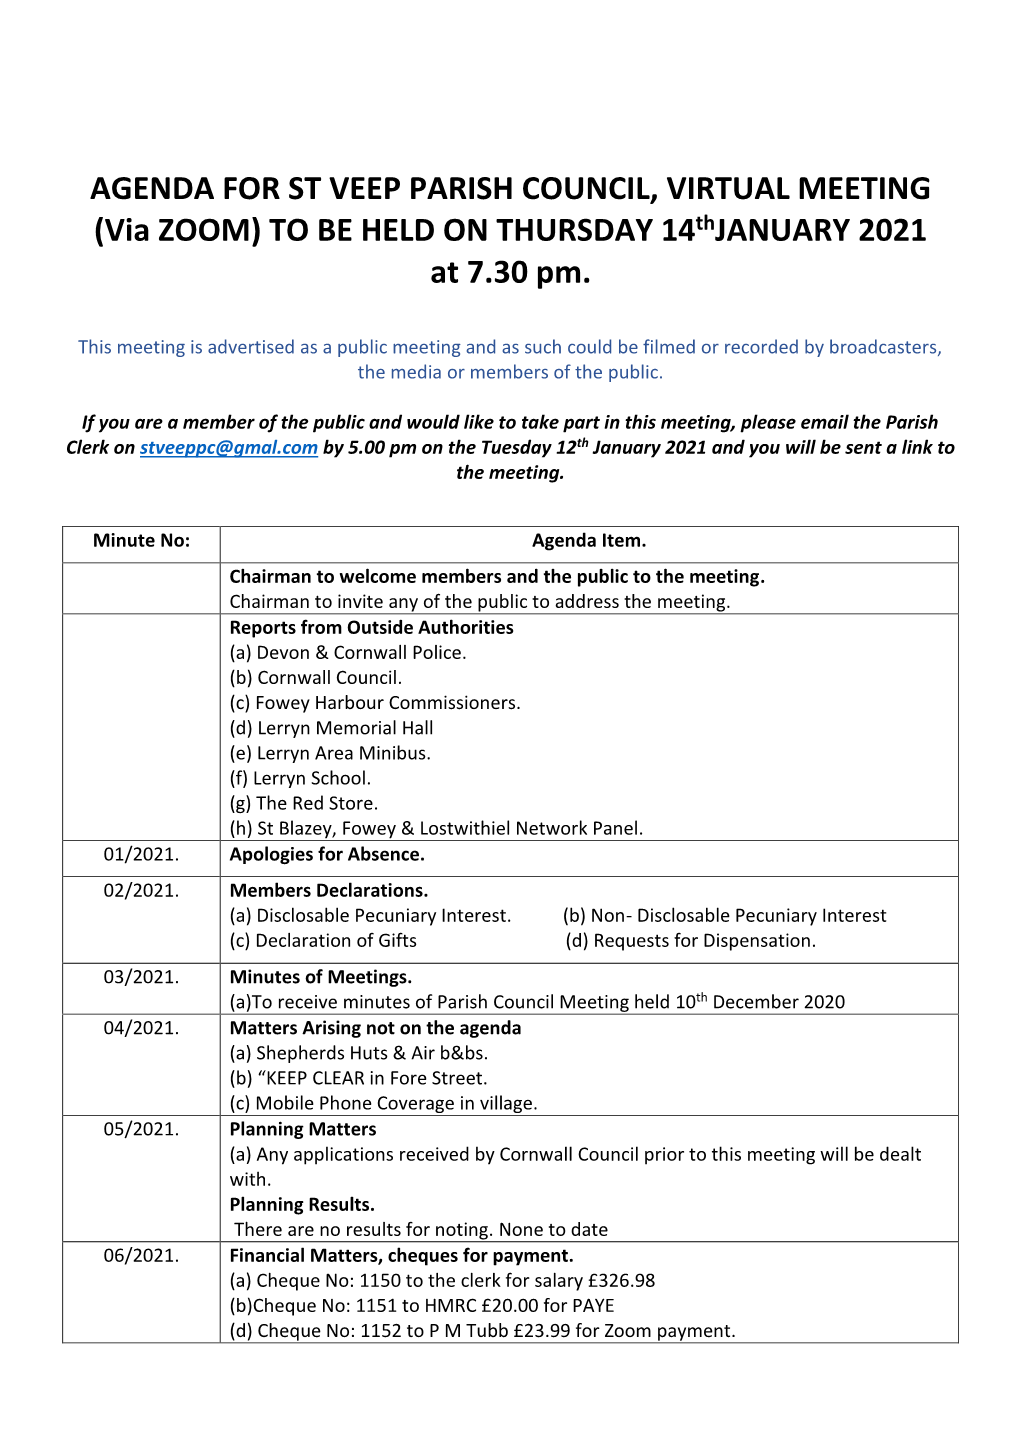 AGENDA for ST VEEP PARISH COUNCIL, VIRTUAL MEETING (Via ZOOM) to BE HELD on THURSDAY 14Thjanuary 2021 at 7.30 Pm